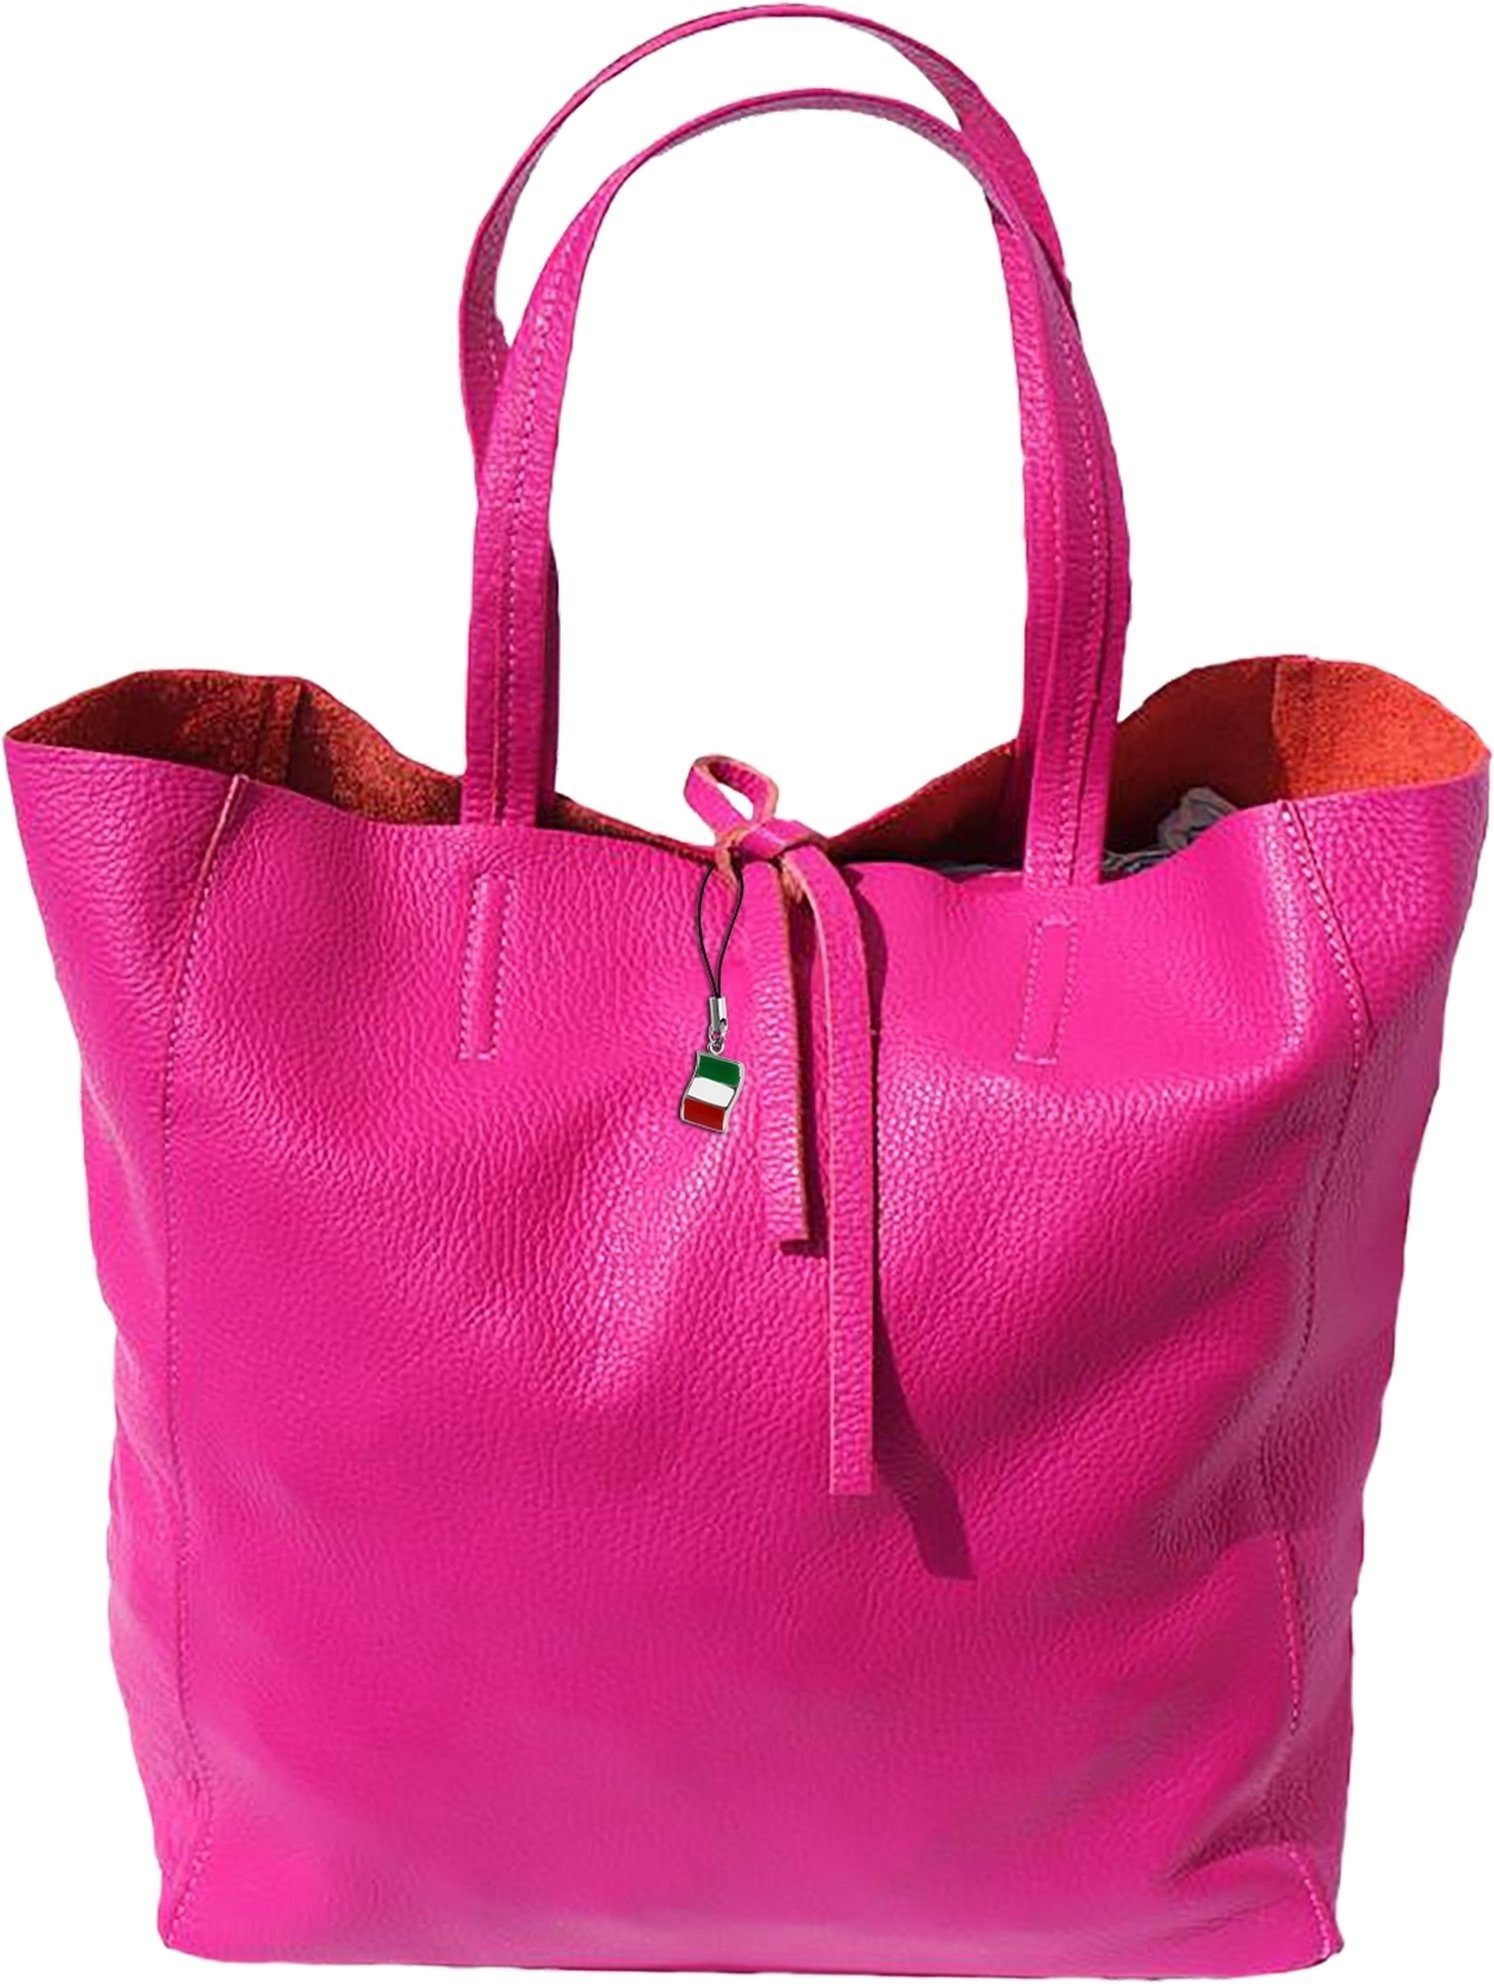 FLORENCE Schultertasche Florence ital. Echtleder Shopper pink (Shopper),  Damen Leder Shopper, Schultertasche, pink ca. 30cm